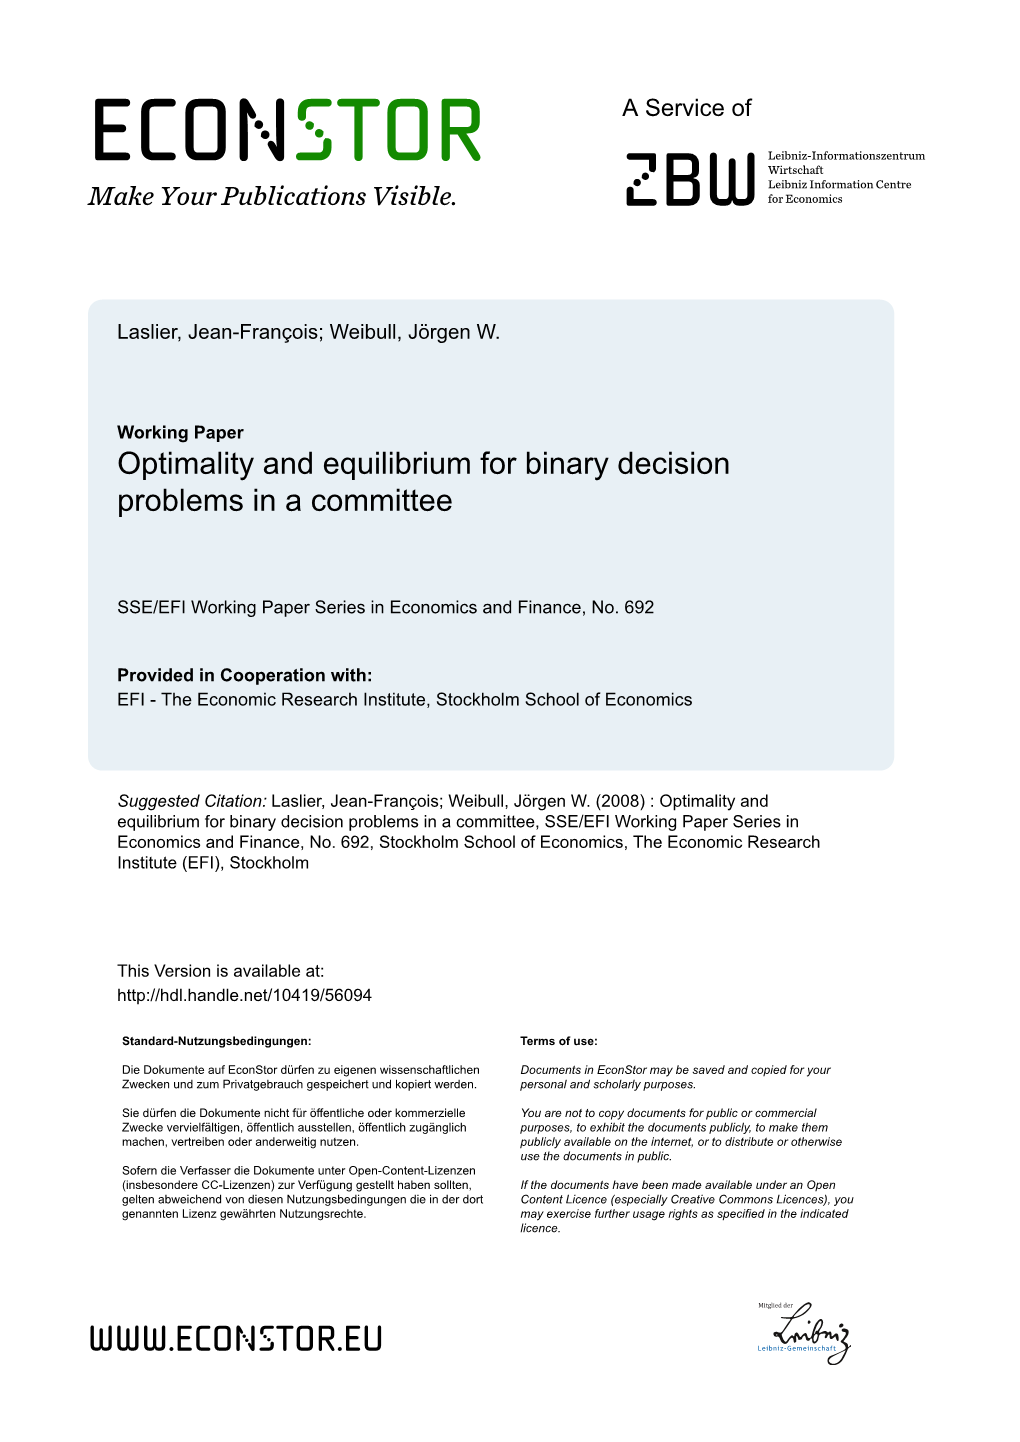 Optimality and Equilibrium for Binary Decision Problems in a Committee